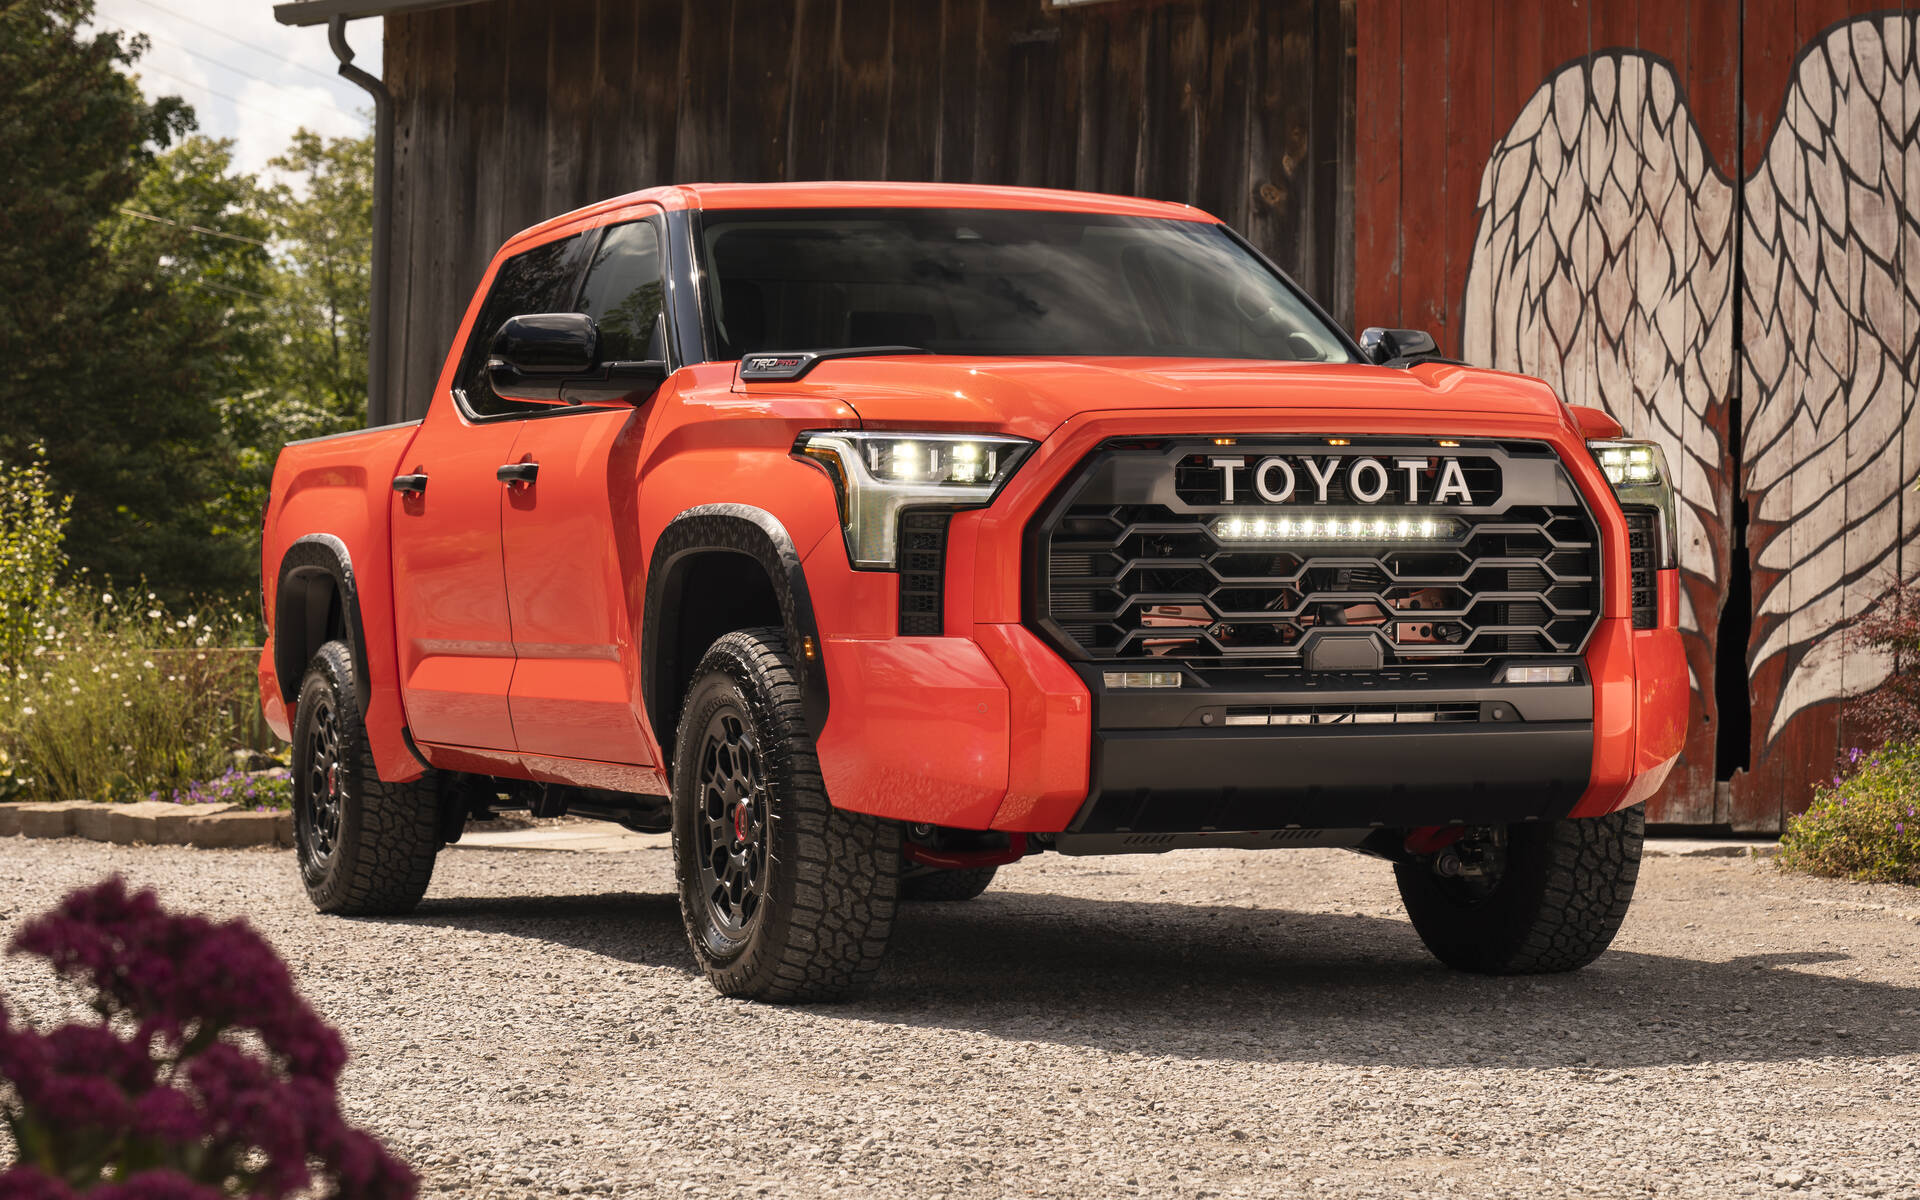 Share 98+ about 2022 toyota trd pro tundra unmissable in.daotaonec